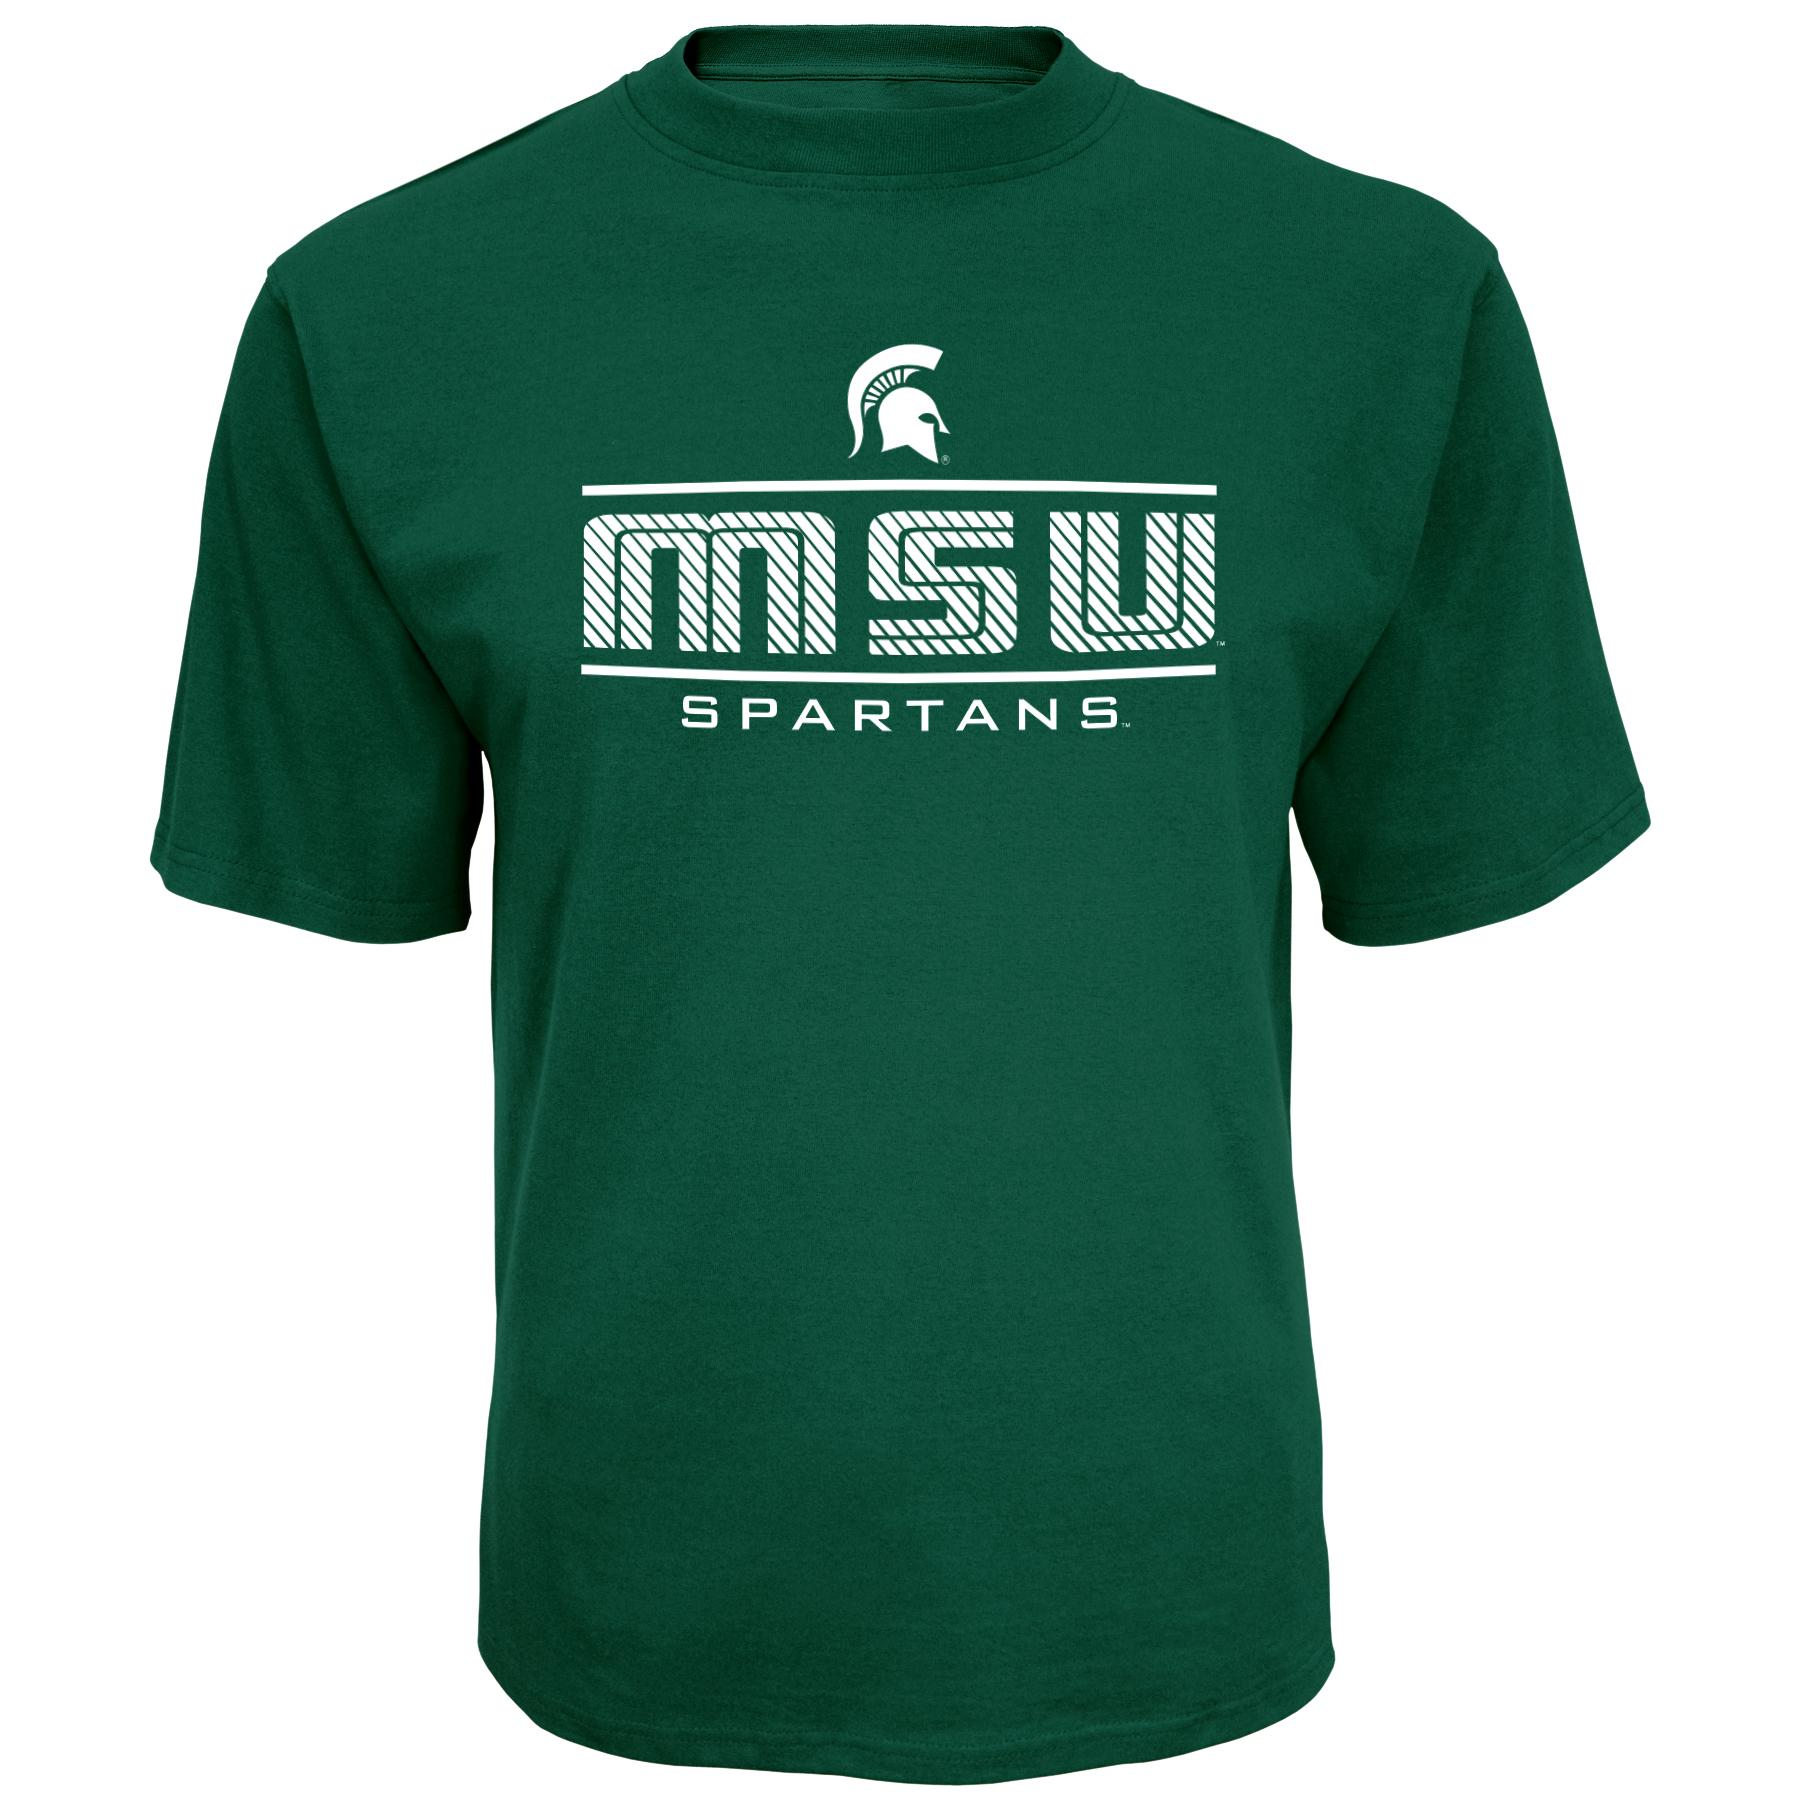 NCAA Men's Big & Tall Graphic T-Shirt - Michigan State Spartans